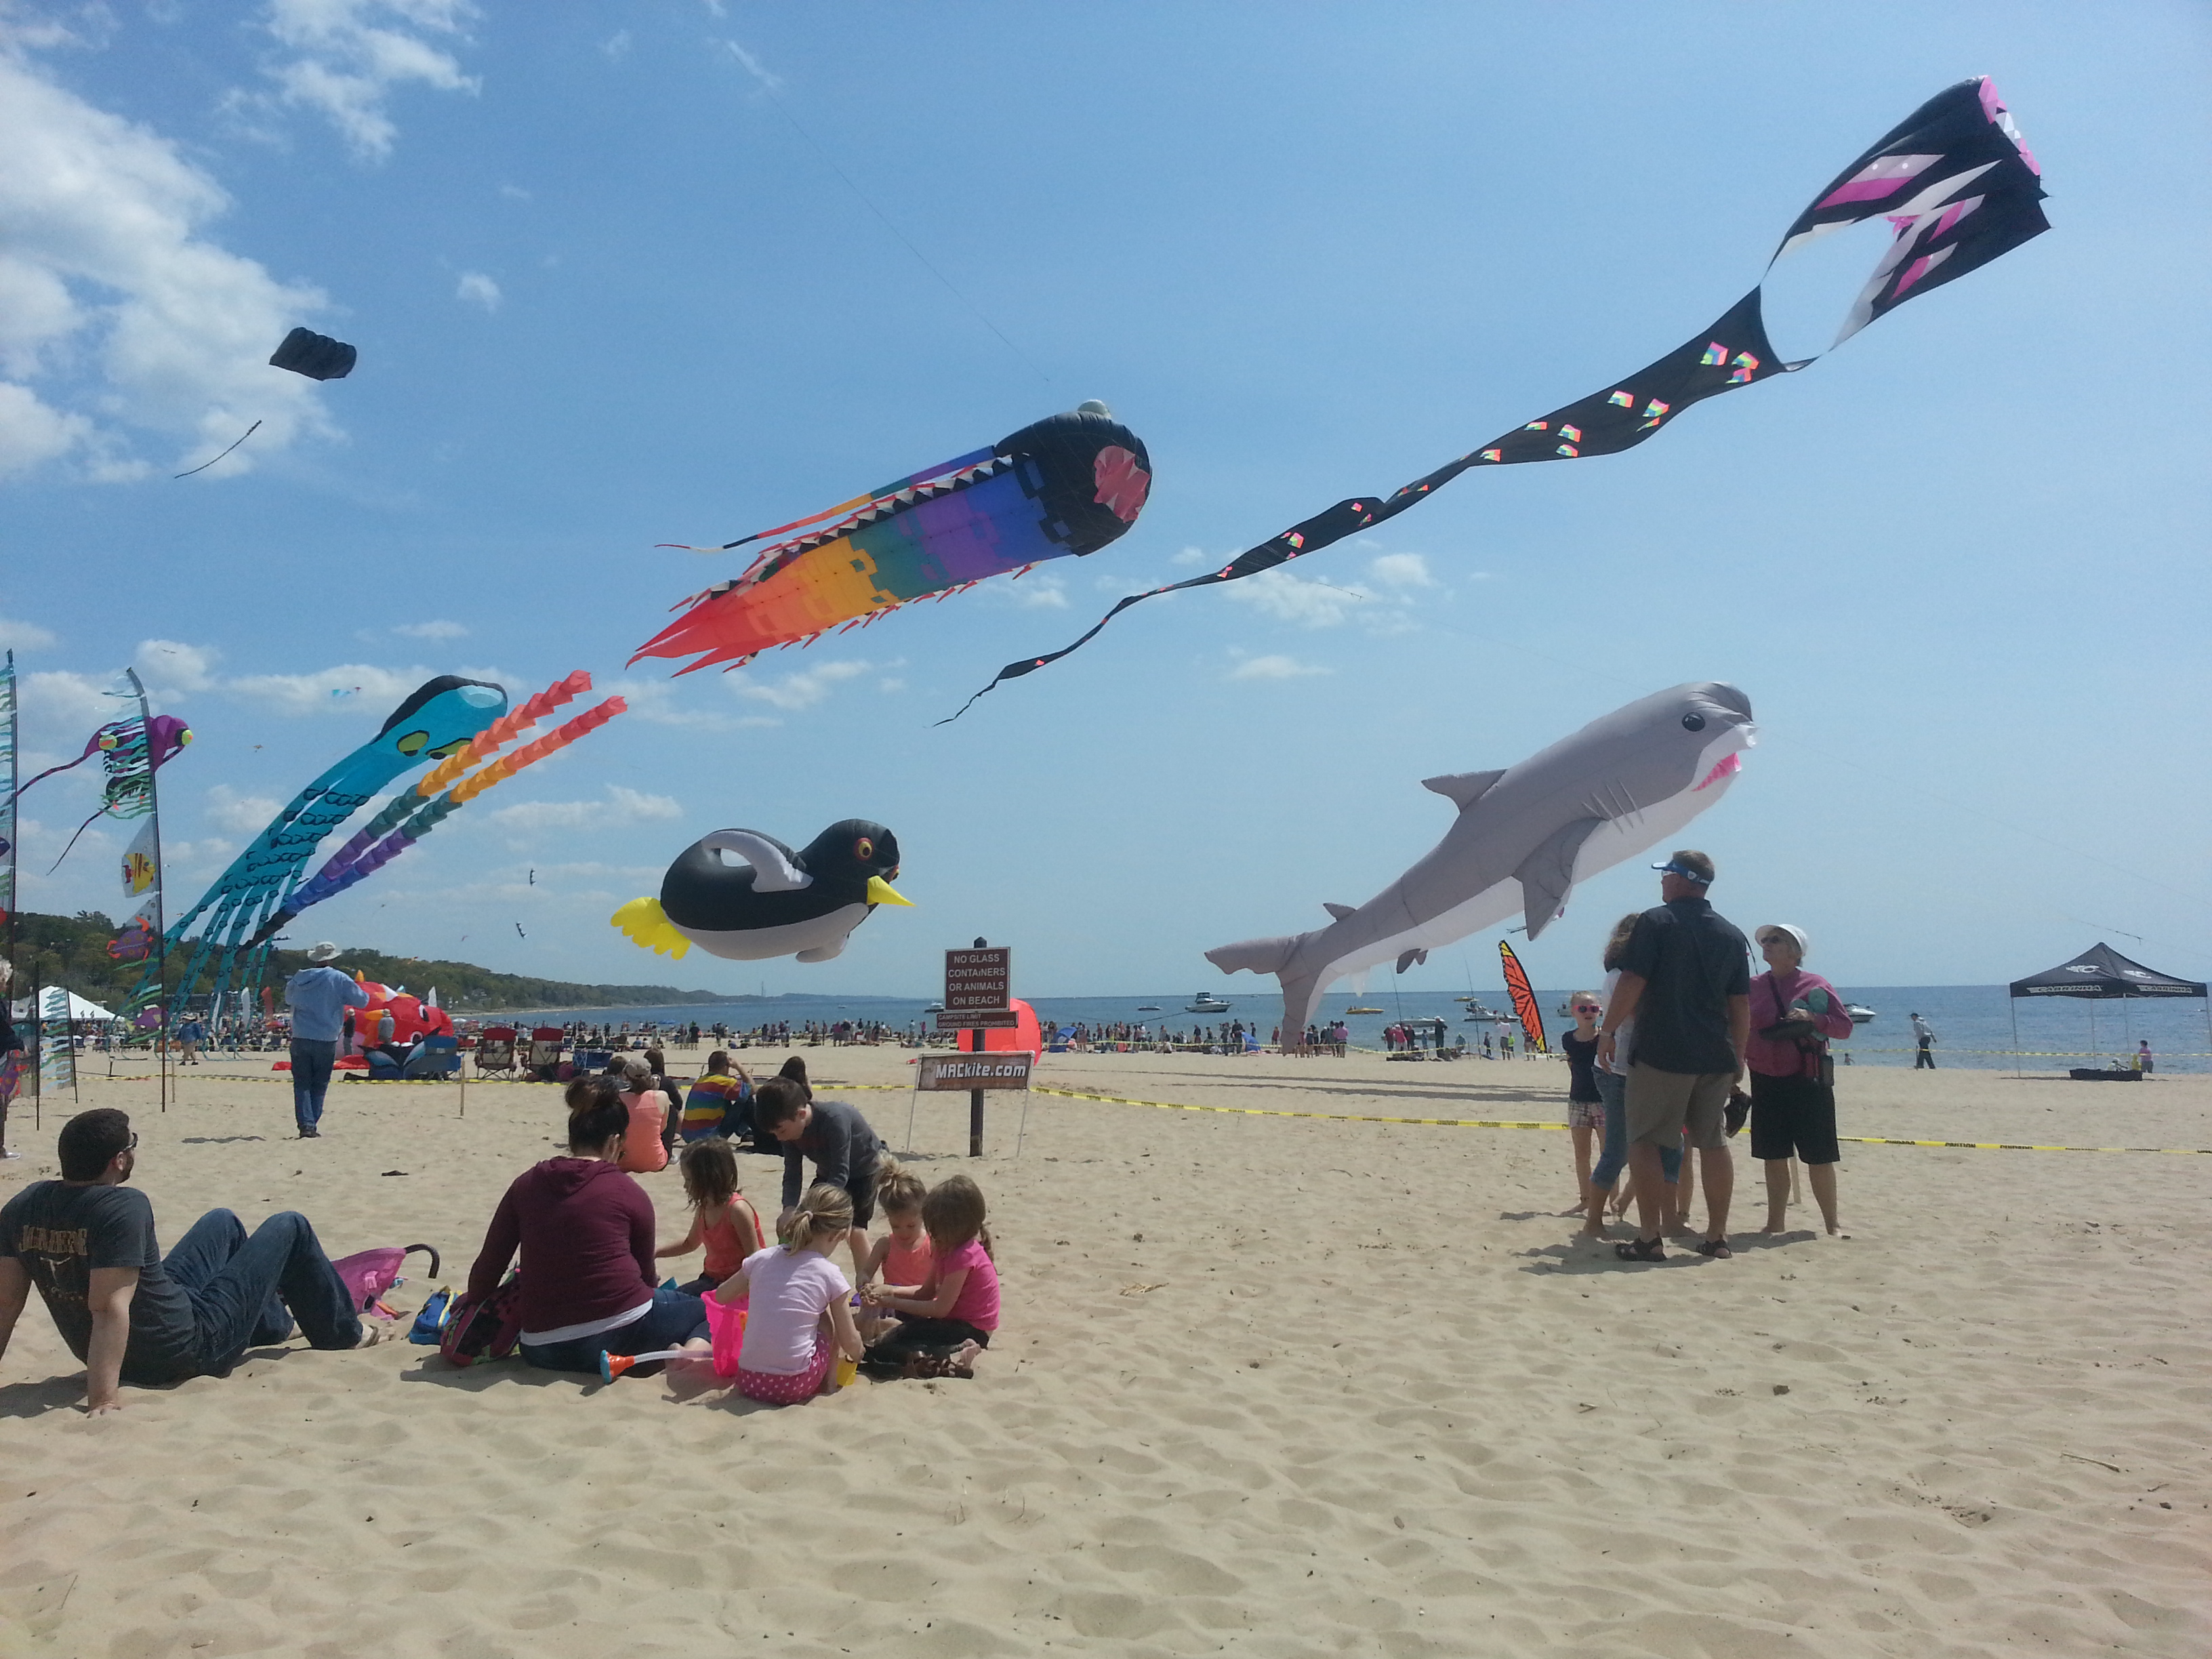 Grand Haven State Park is beautiful any time of year, but the annual kite festival adds vibrant color and splash to a campground stay. (Marie Havenga | Travel Beat Magazine)